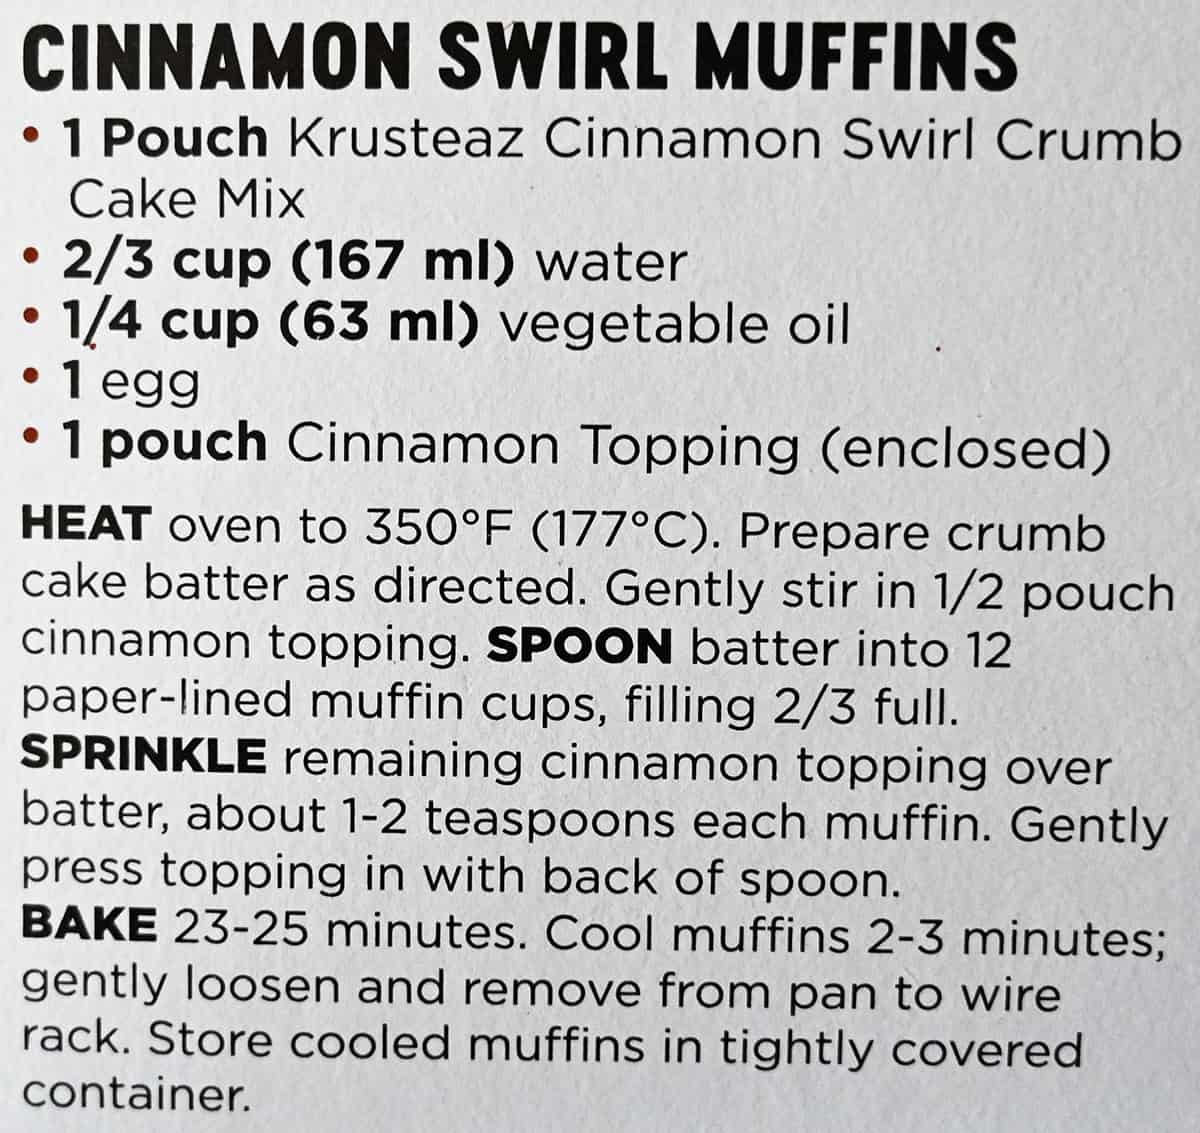 Image of the instructions for the cinnamon swirl muffins from the back of the box.